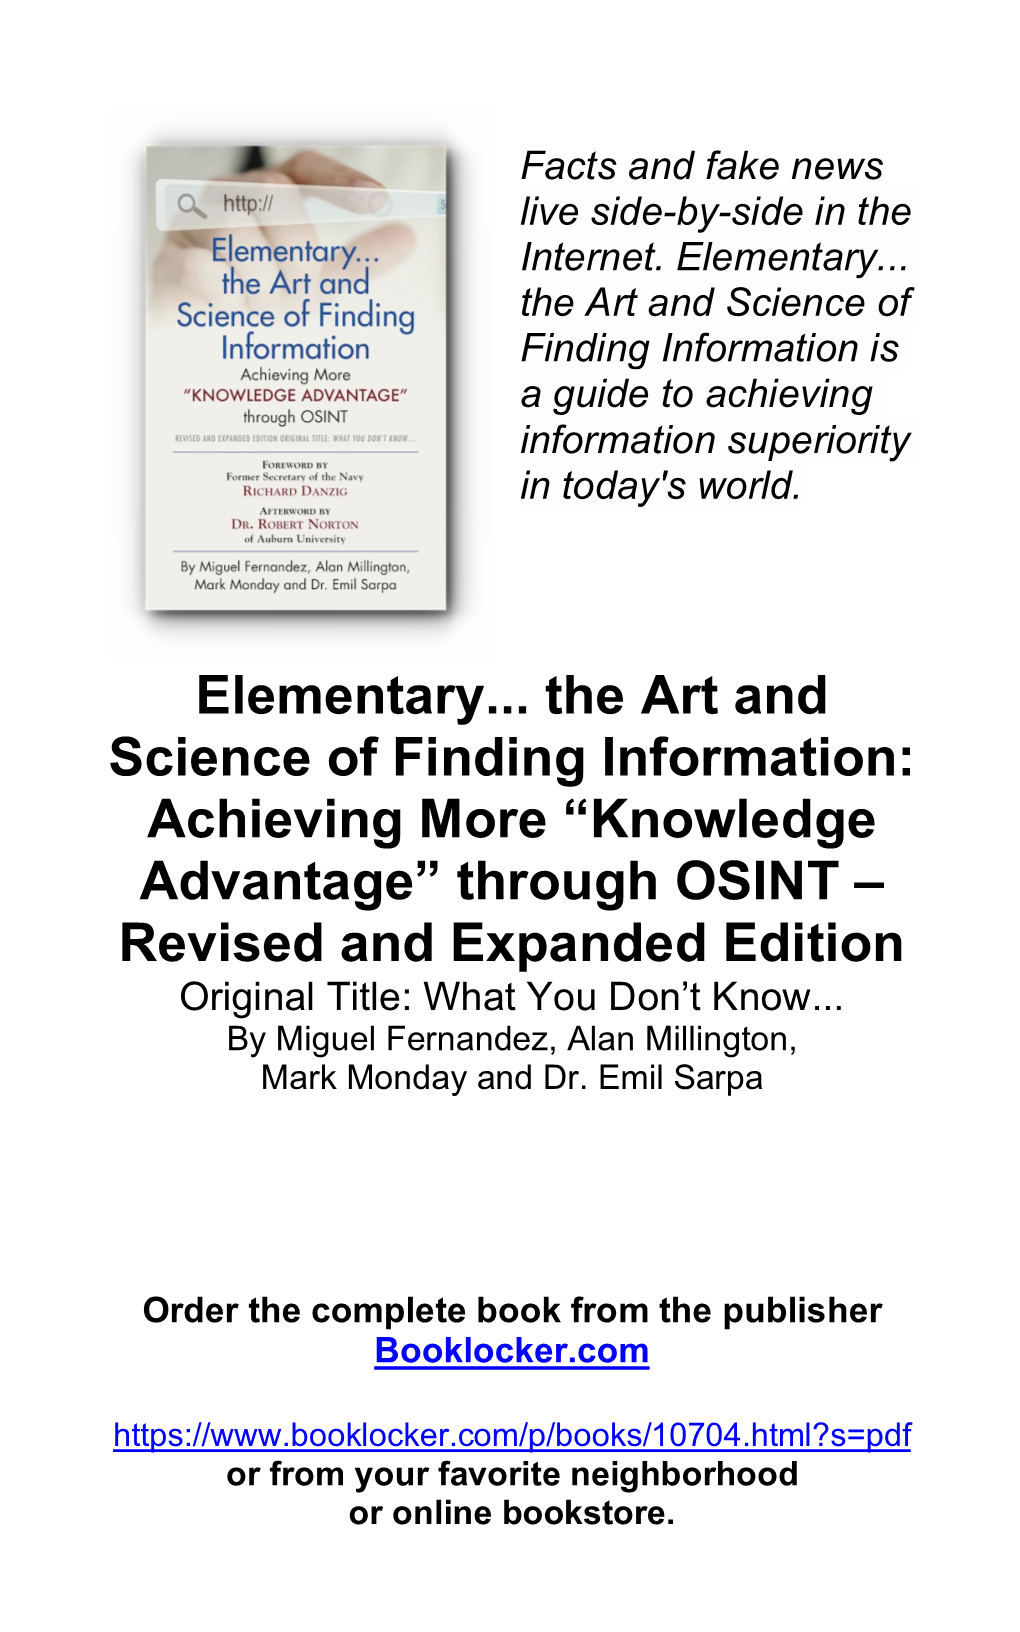 Elementary... the Art and Science of Finding Information: Achieving More